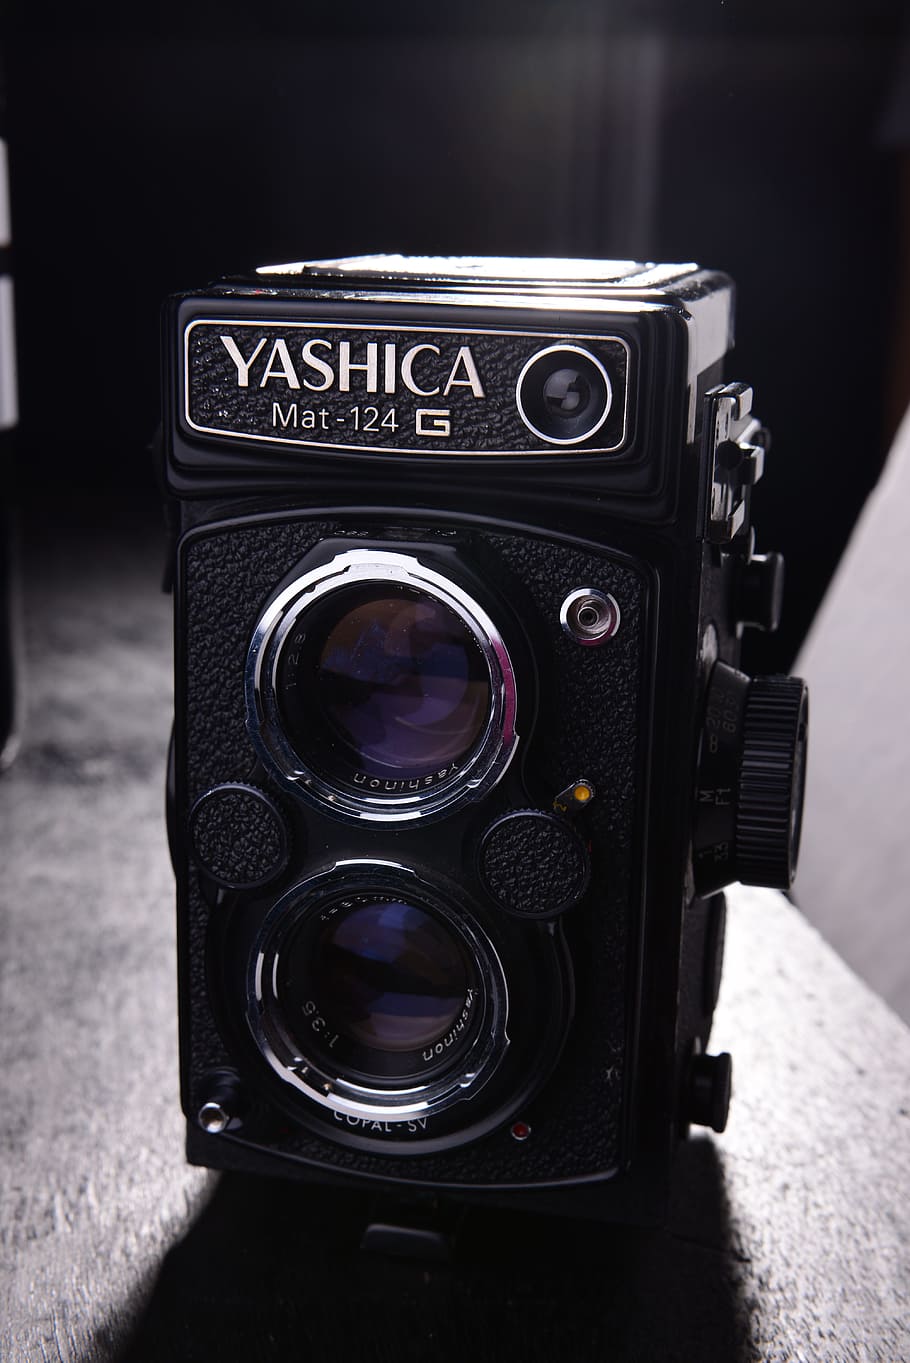 Yashica, Studio, Vintage, Cameras, vintage cameras, camera - Photographic Equipment, retro Styled, old-fashioned, equipment, old